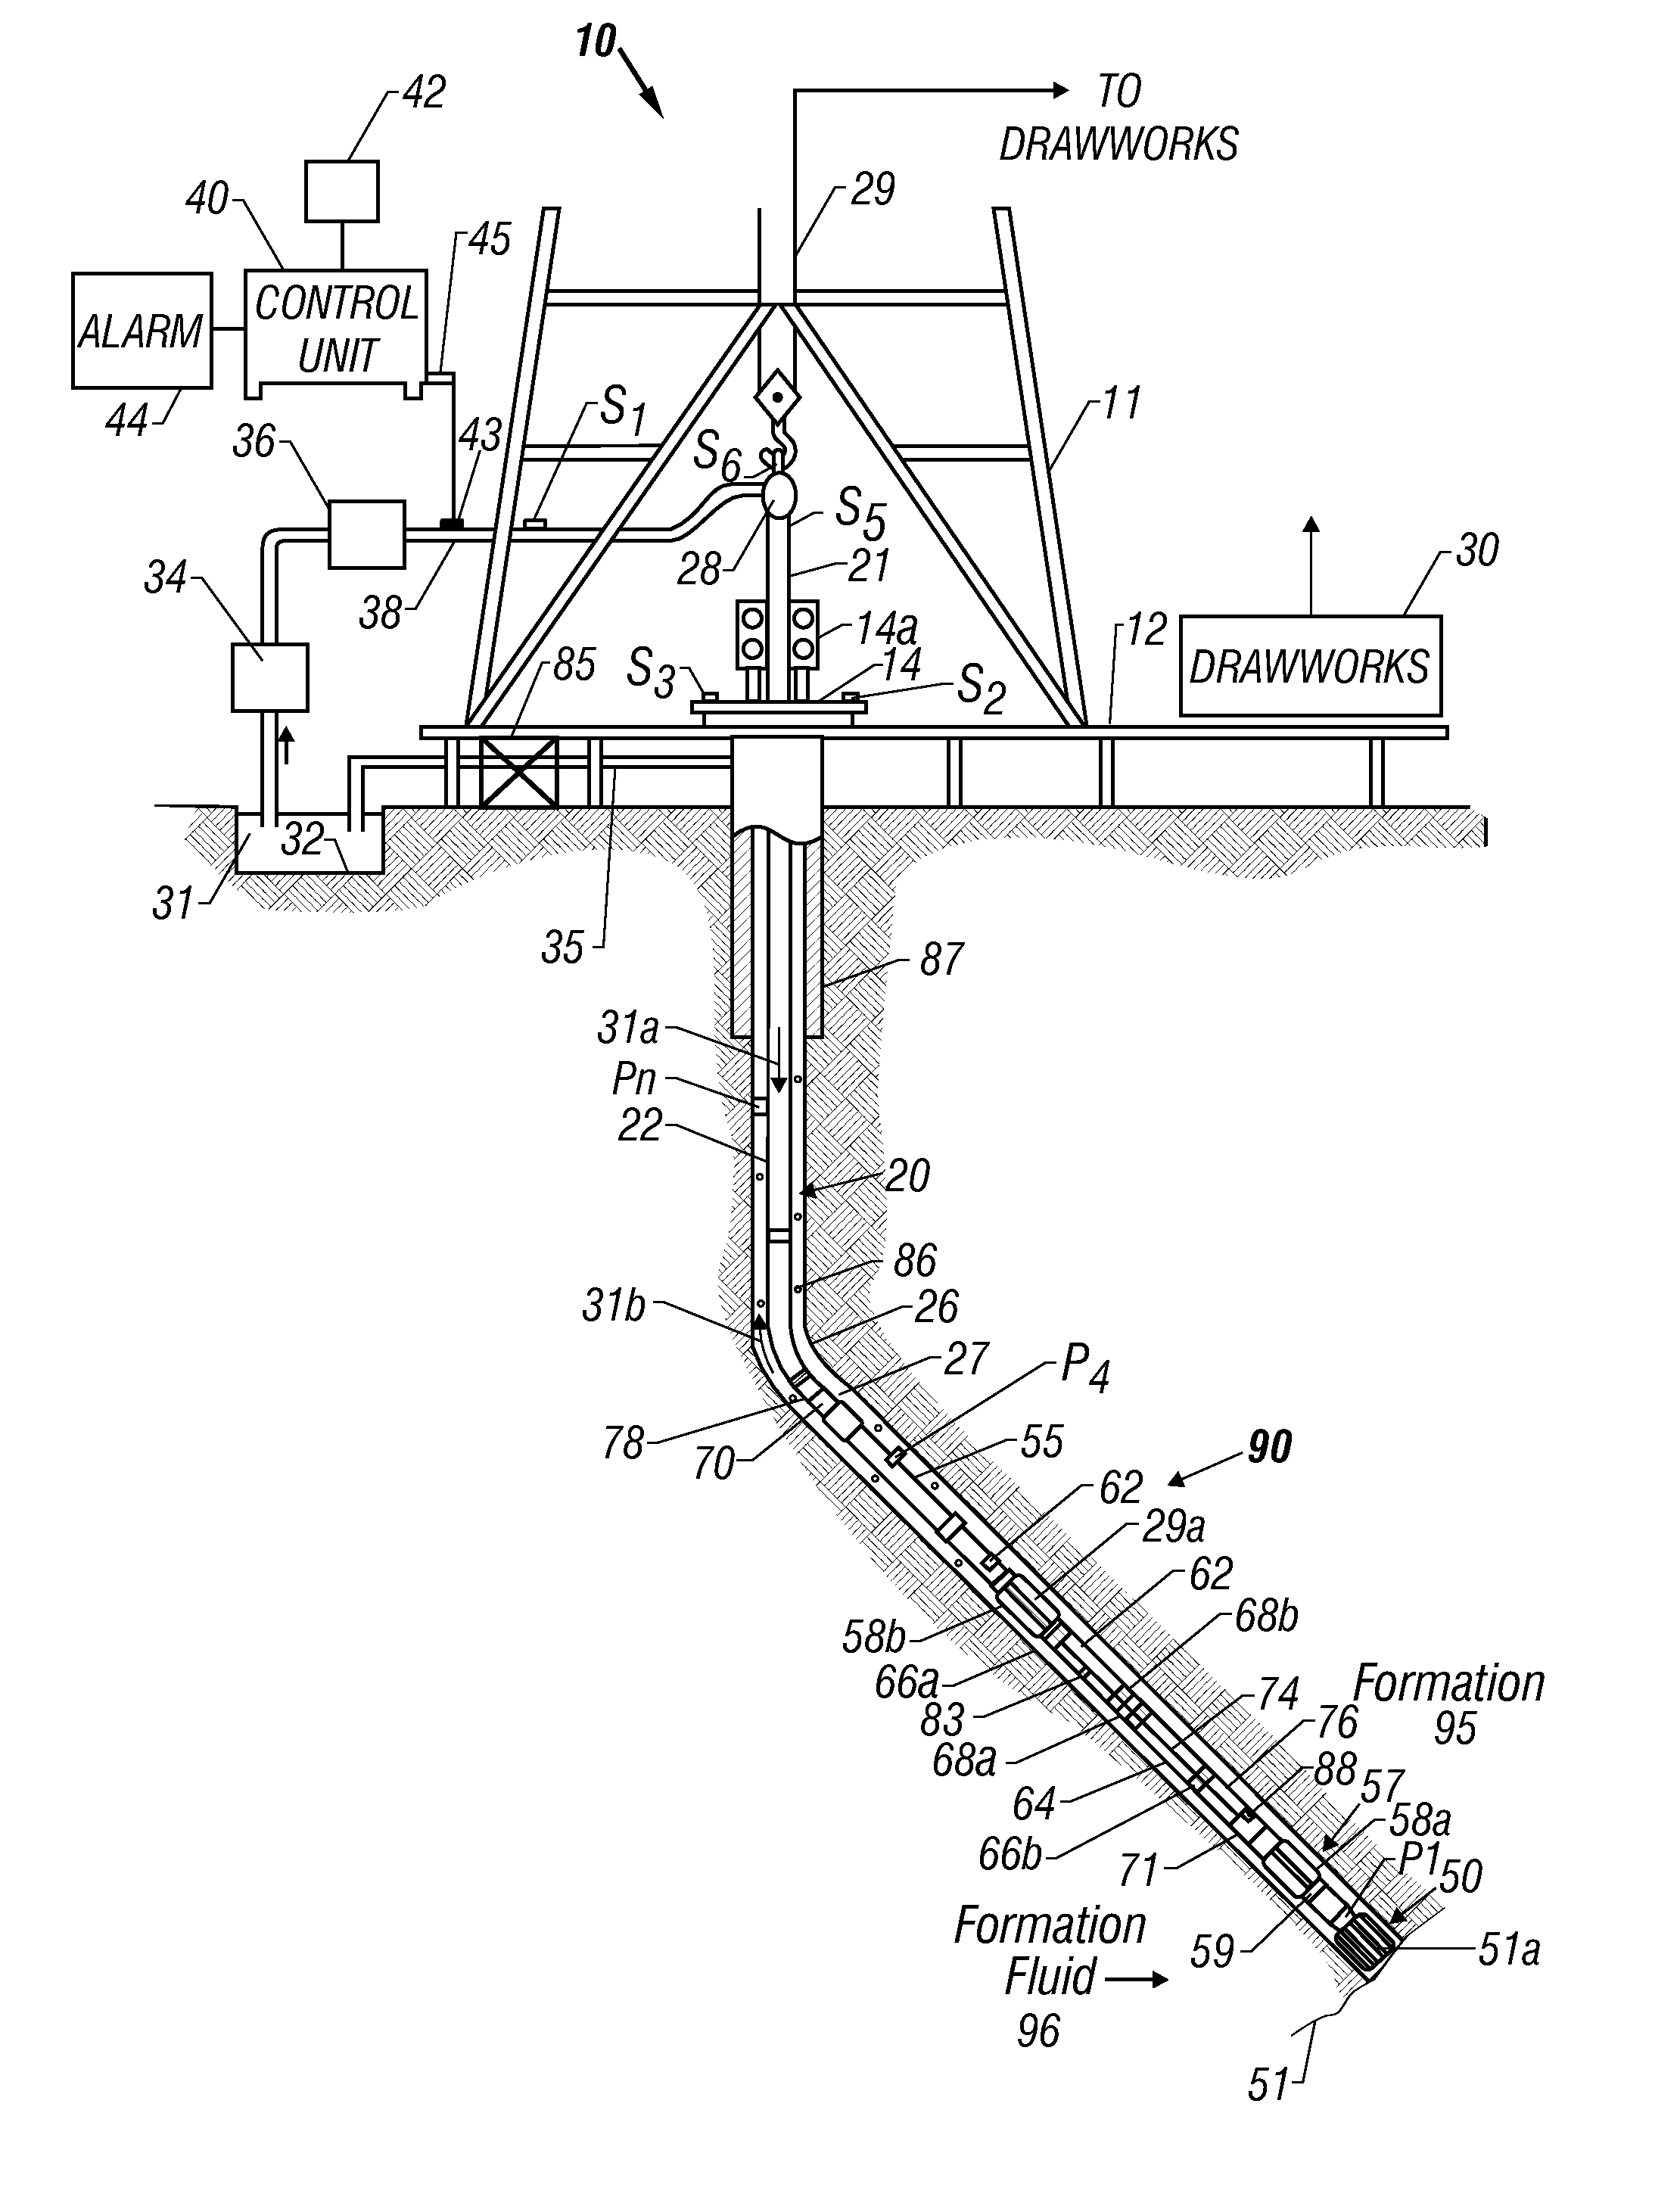 Method and Apparatus for Fluid Influx Detection While Drilling